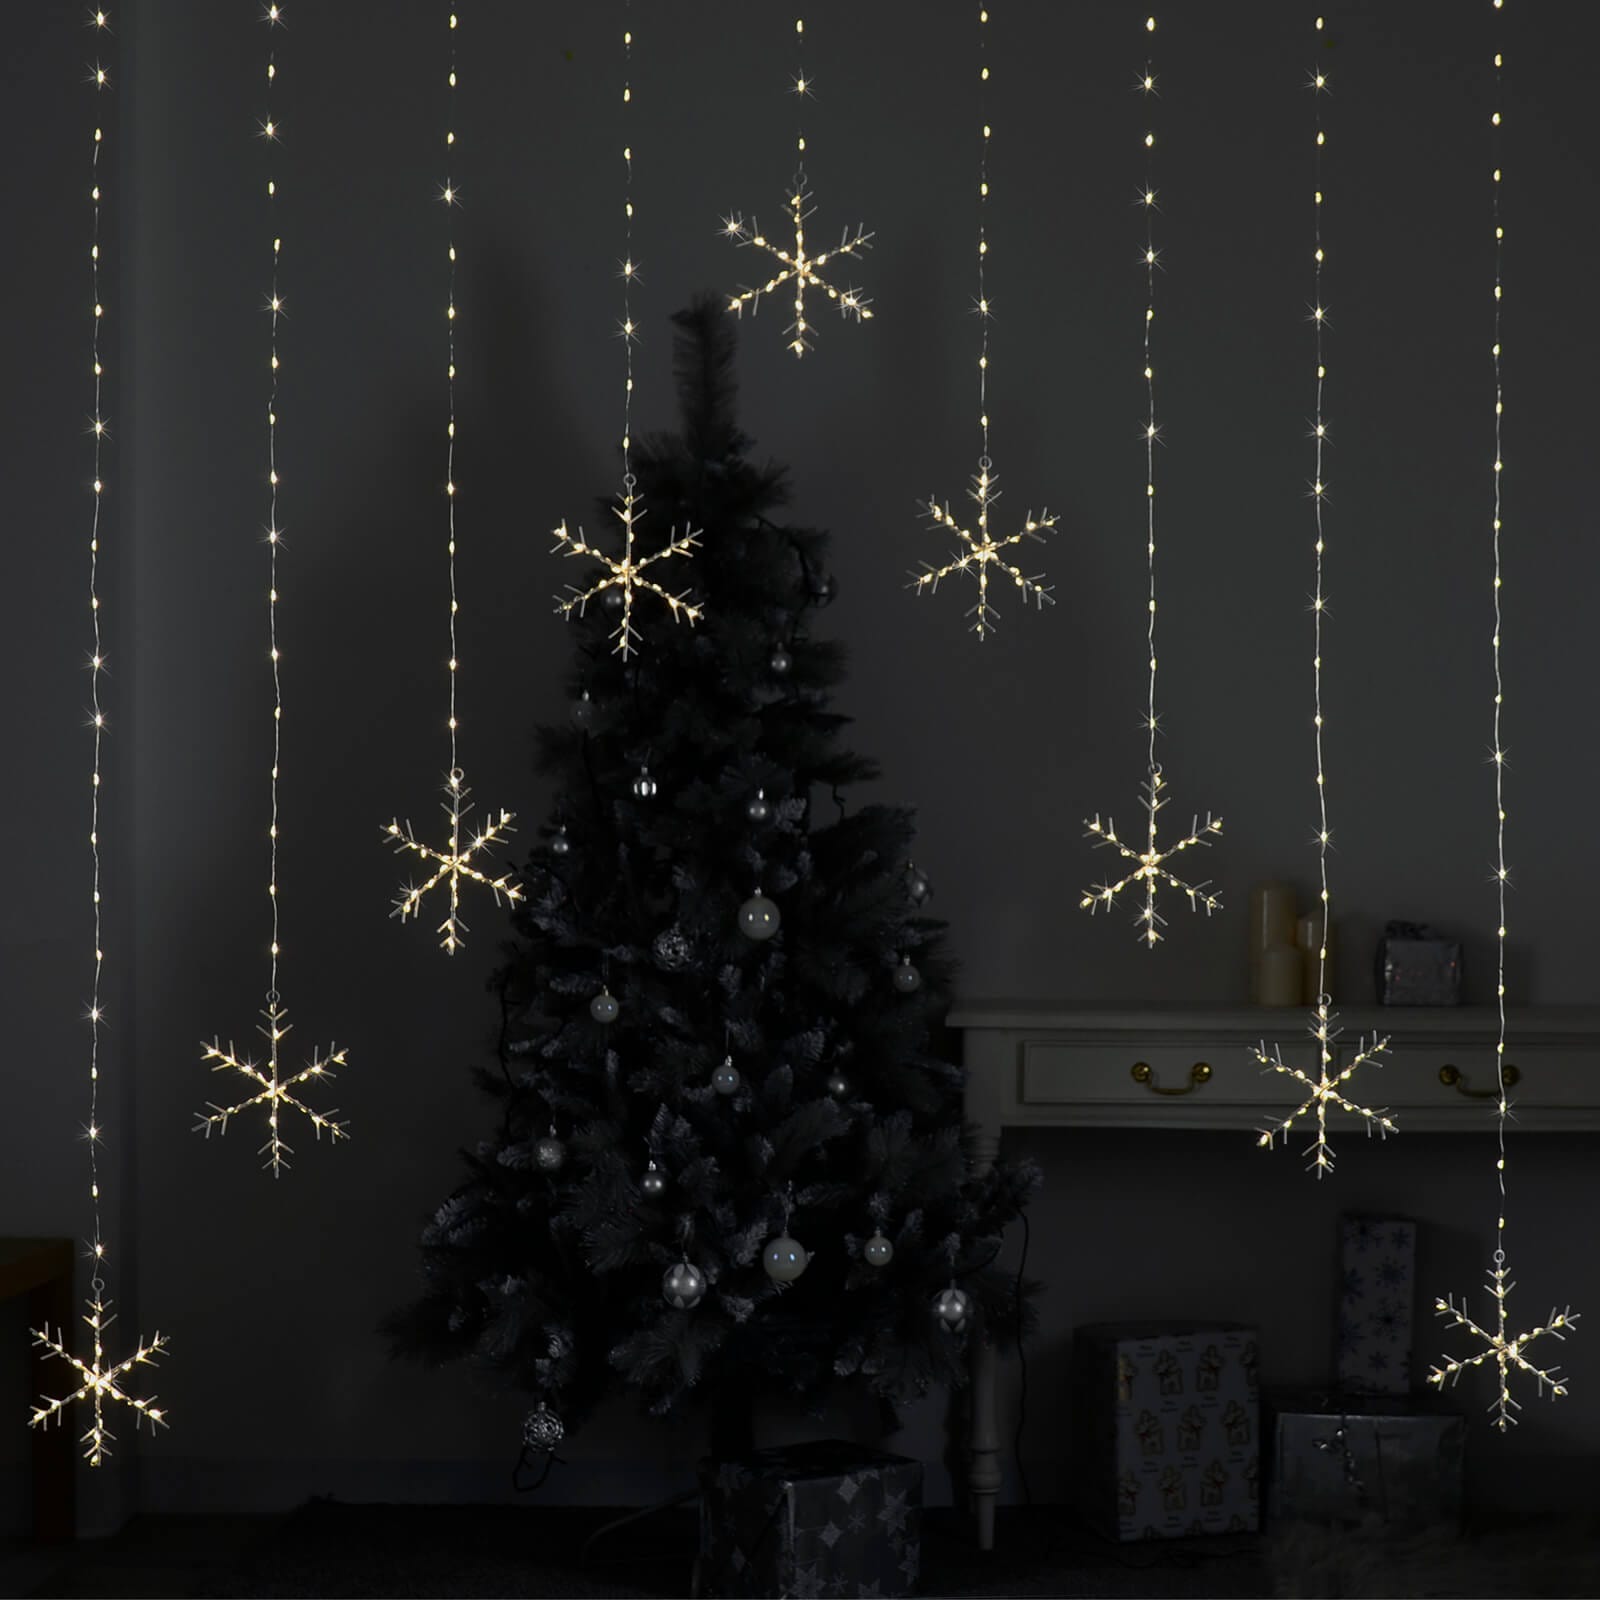 Snowflake curtain lights with warm white LED lights in 9 strings, with Christmas tree and presents